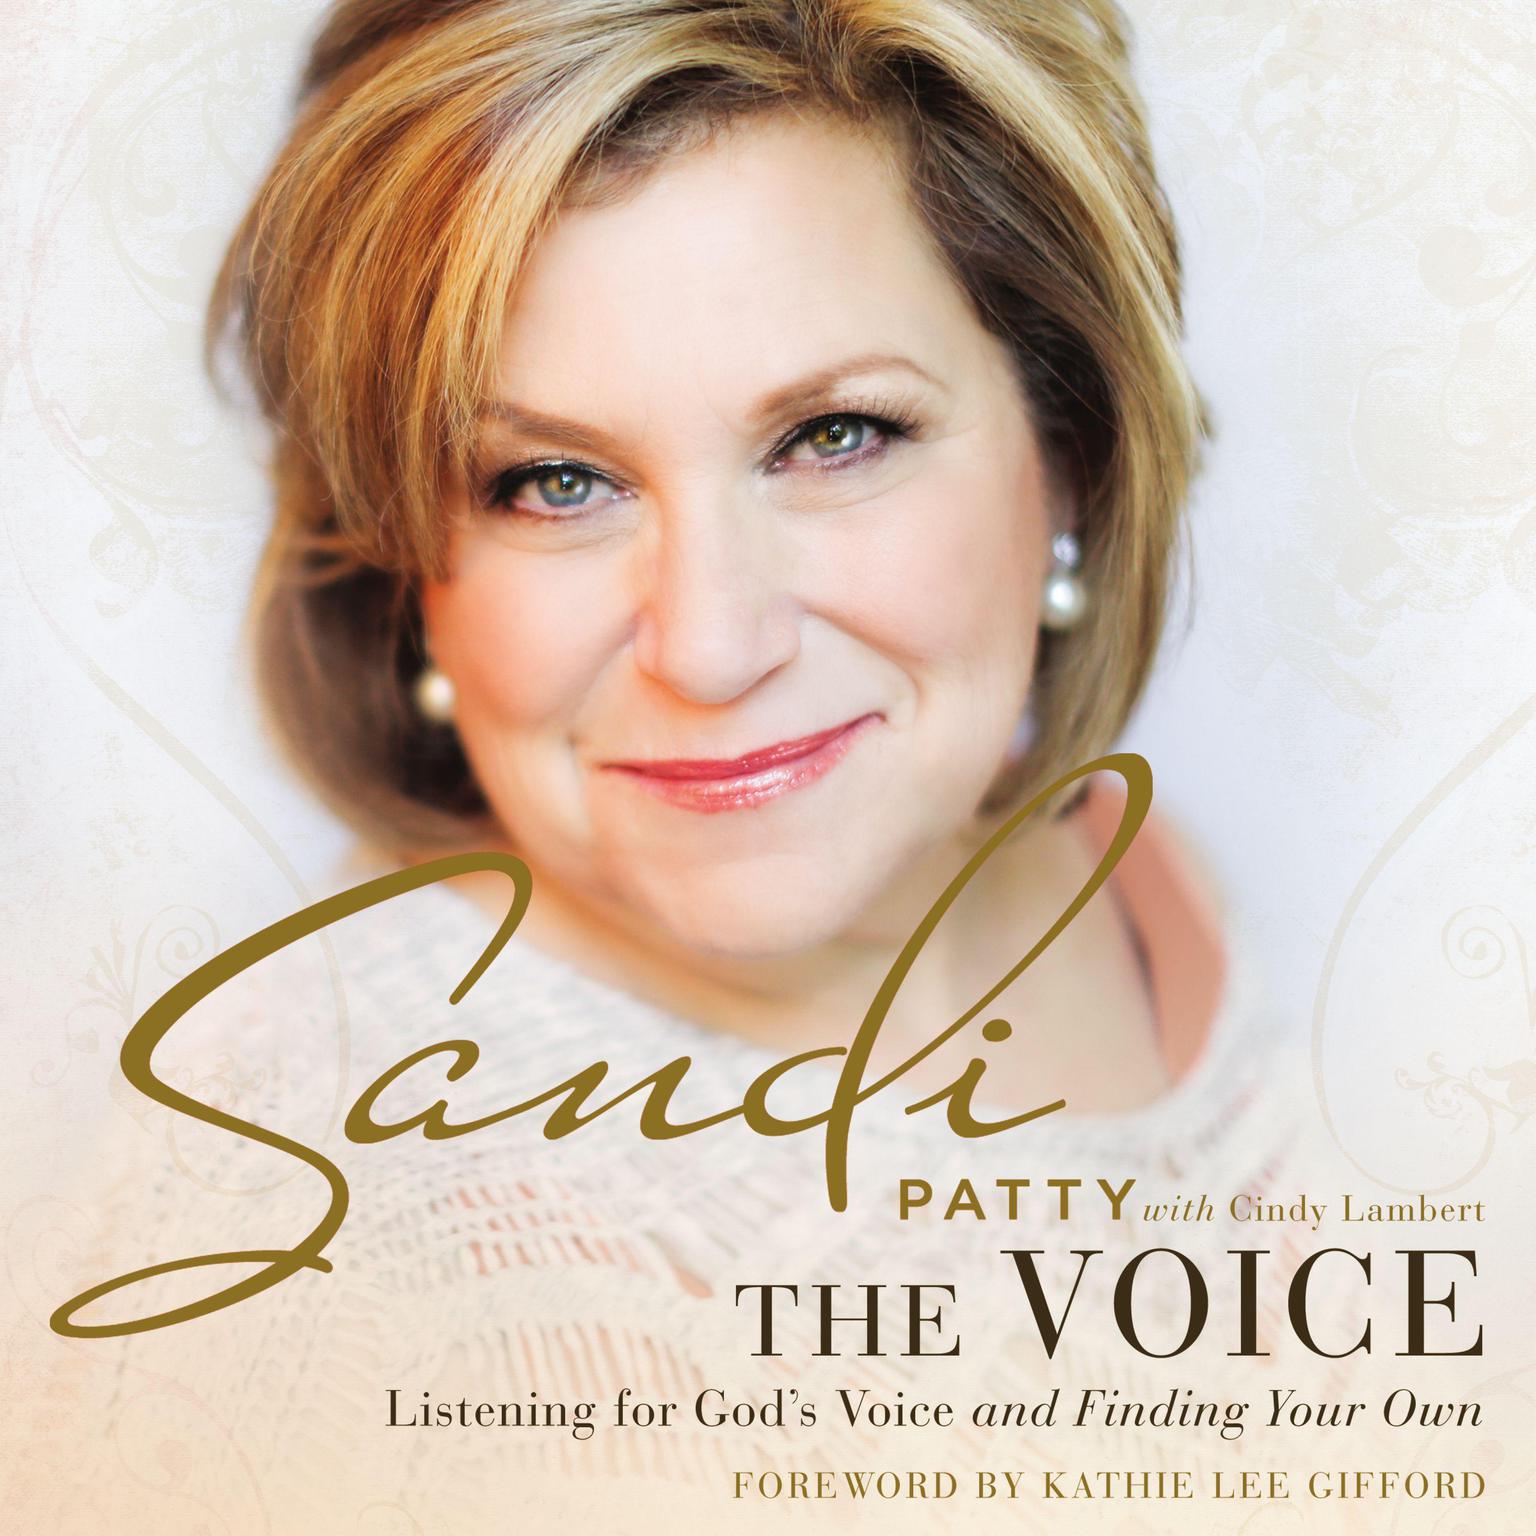 The Voice: Listening for God’s Voice and Finding Your Own Audiobook, by Sandi Patty